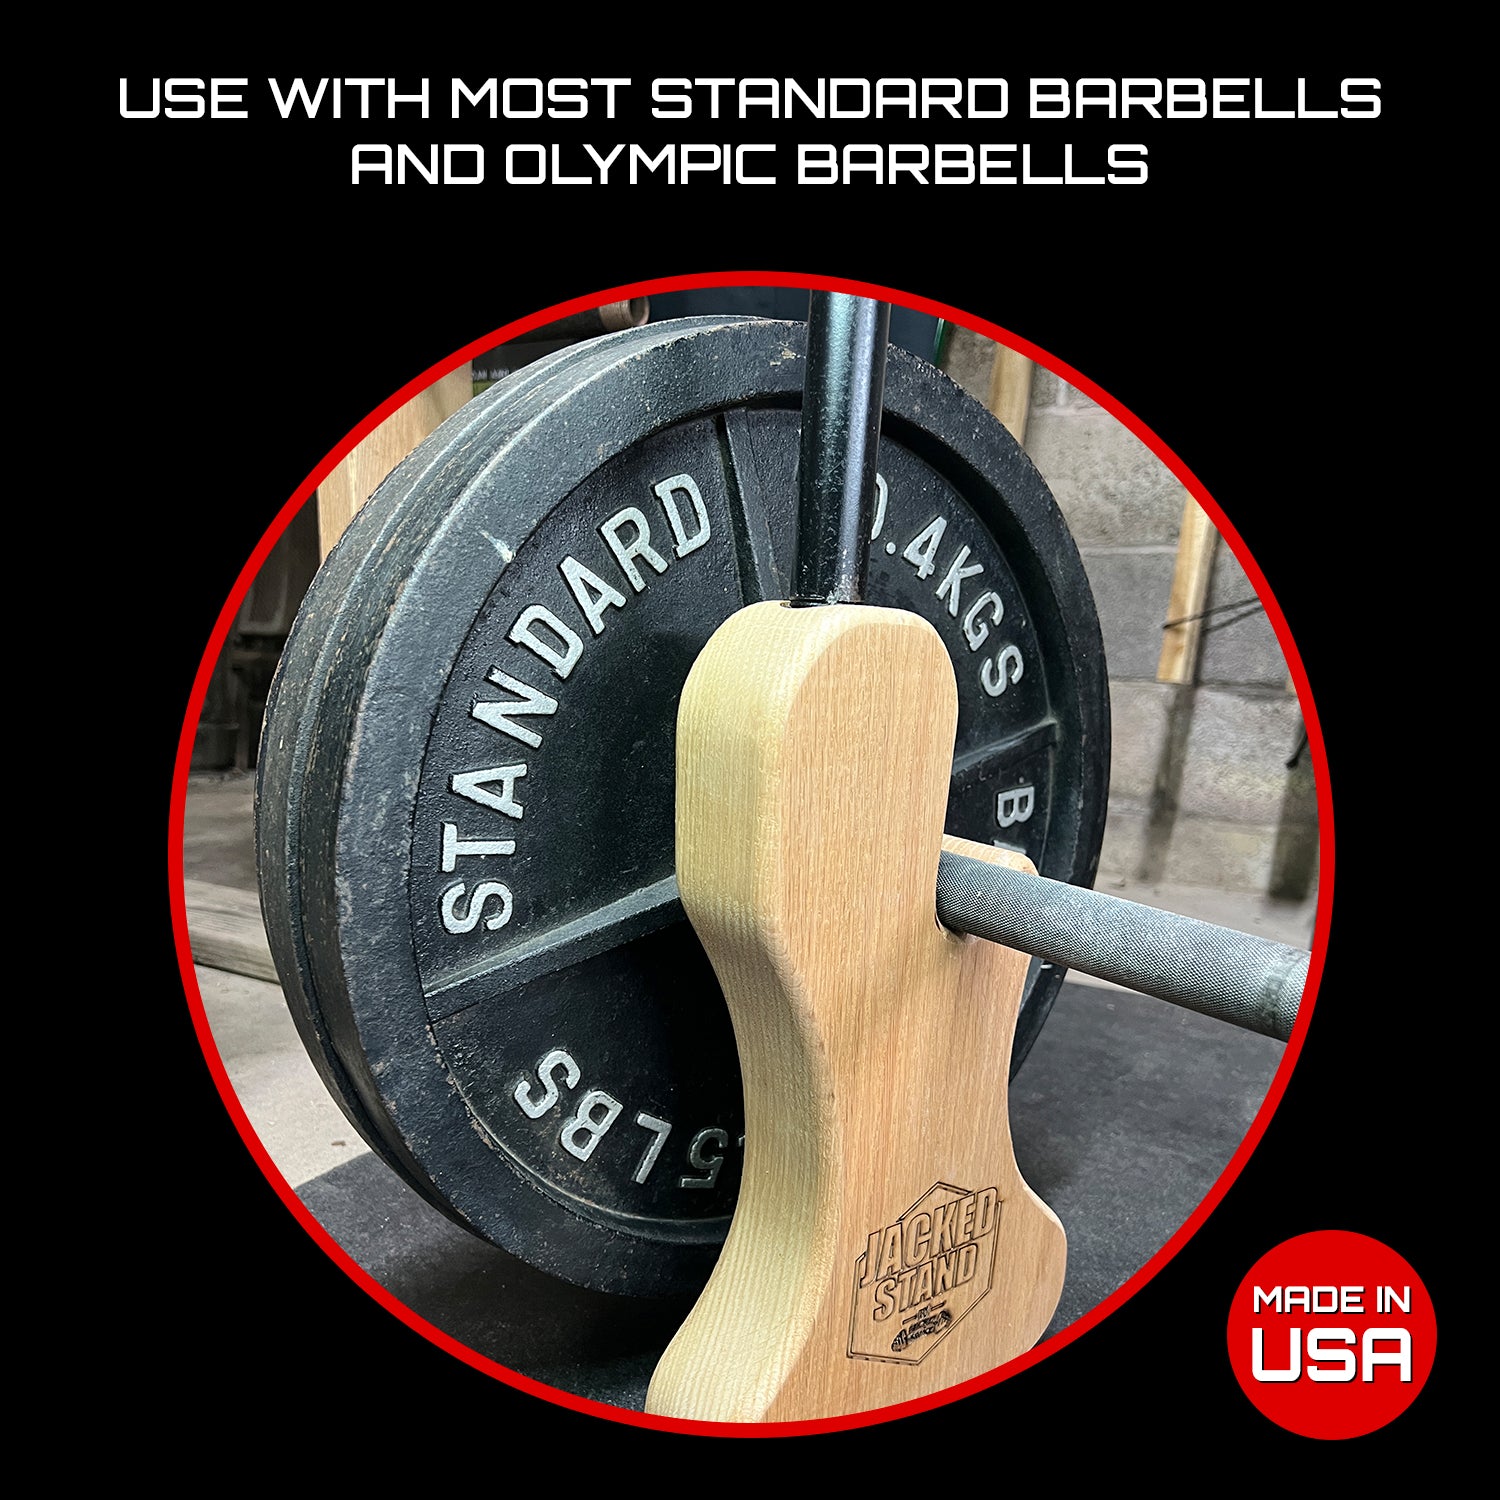 Jacked Stand by Micro Gainz Wooden Deadlift Jack, Used for Olympic Barbells